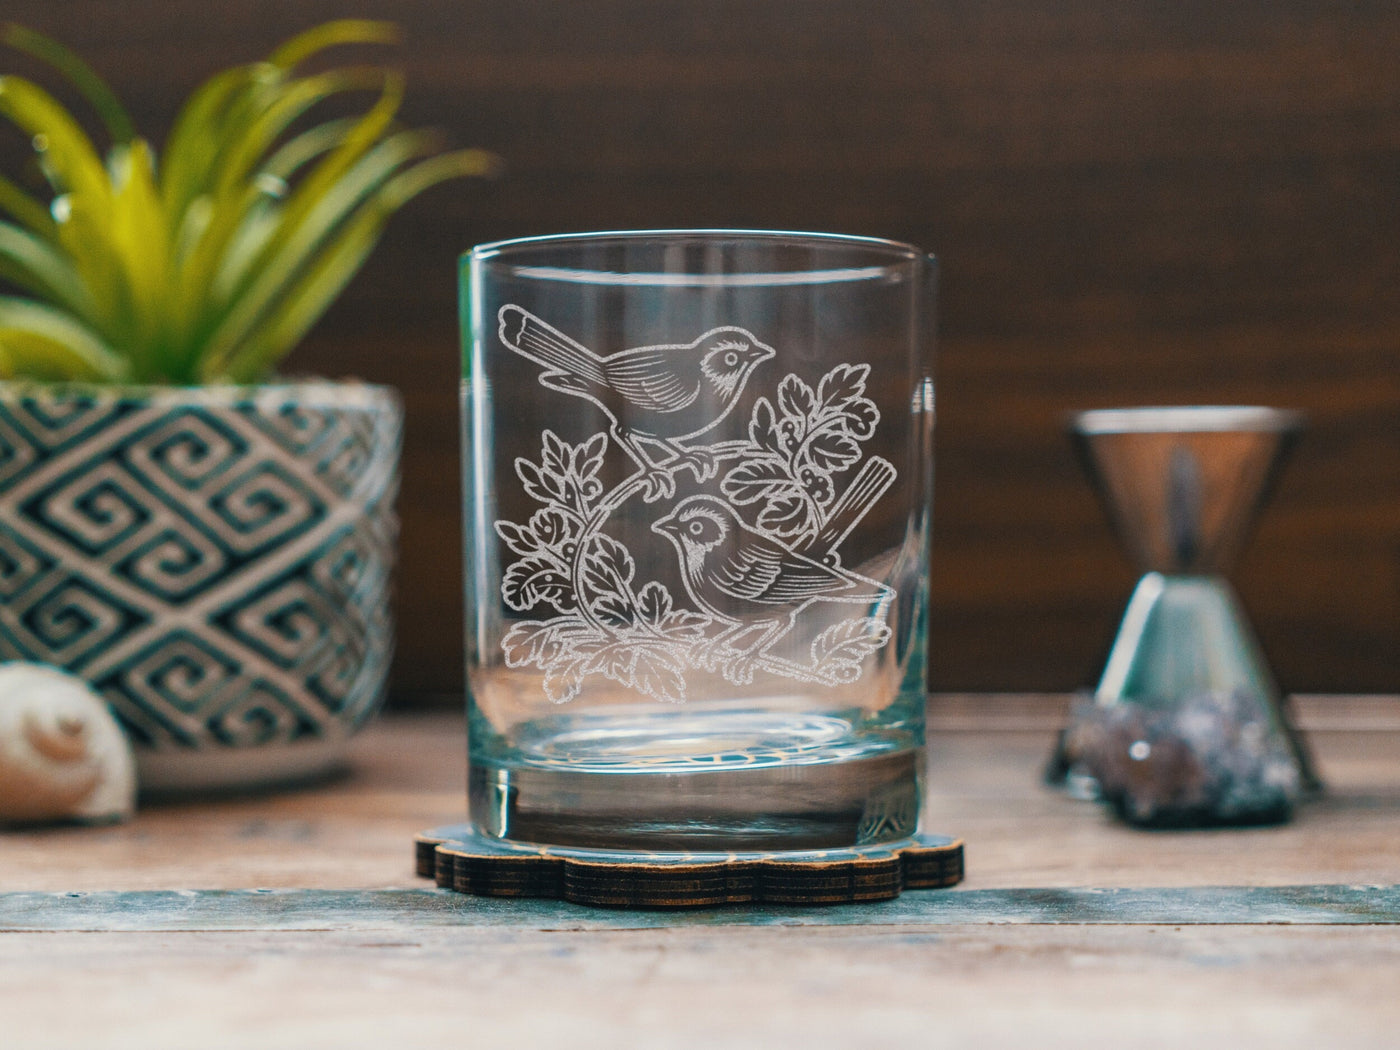 Birds and Flower Glasses | Personalized etched glassware for beer, whiskey, wine & cocktails. Custom home decor drinkware. Bird lovers gift.